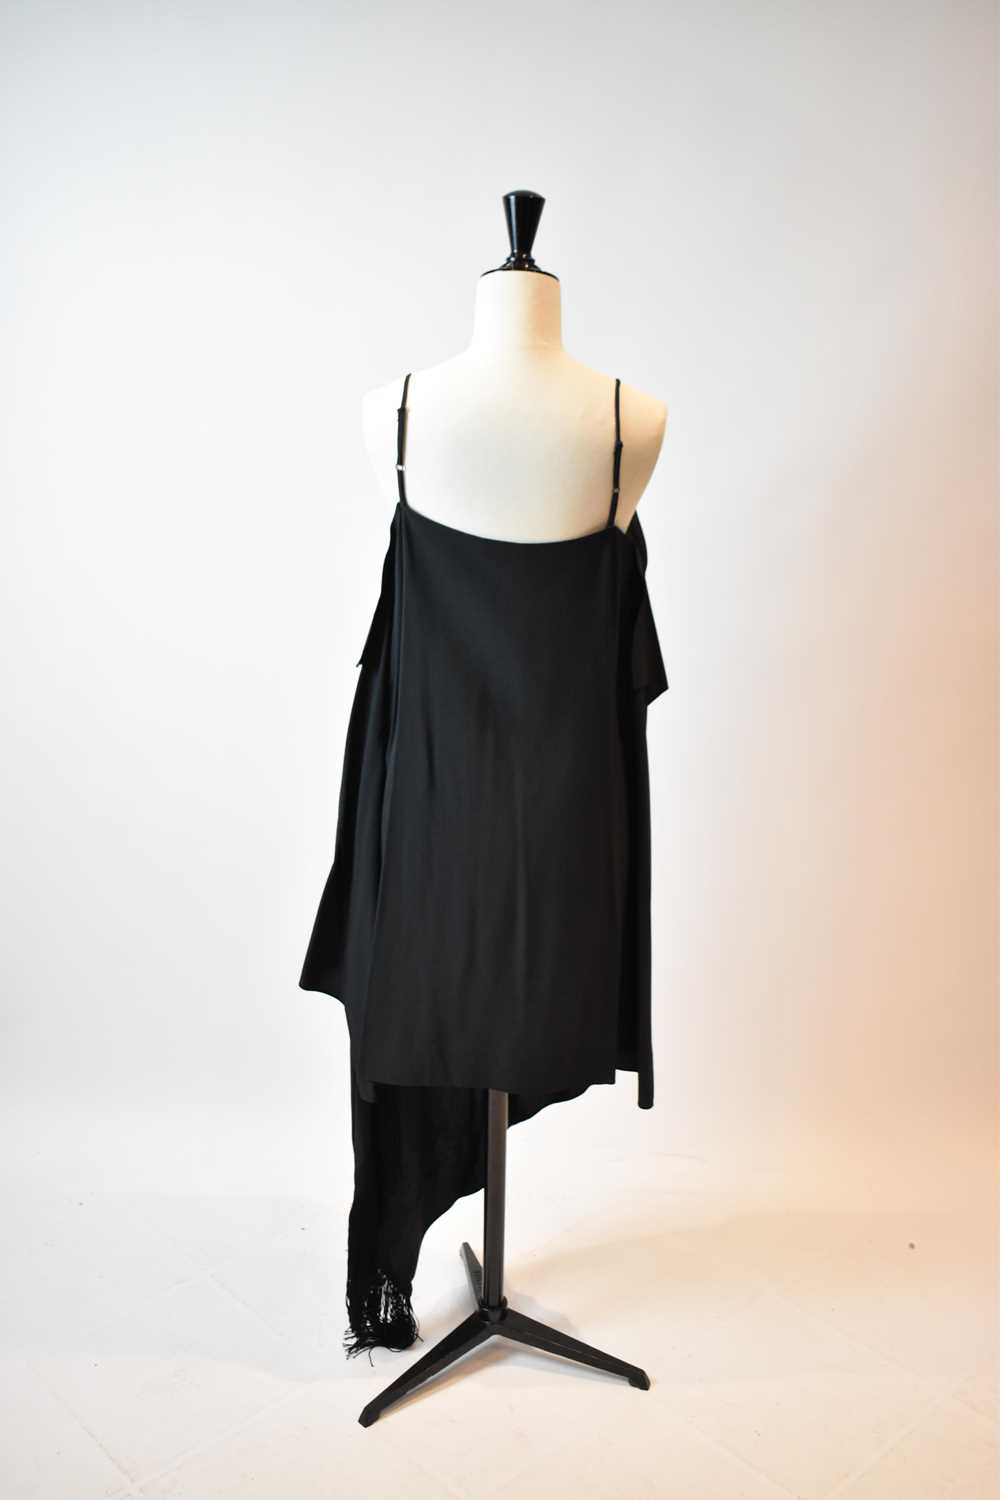 BALENCIAGA; a black wool A-symmetrical dress with spaghetti straps and matching cape, both with - Image 3 of 4